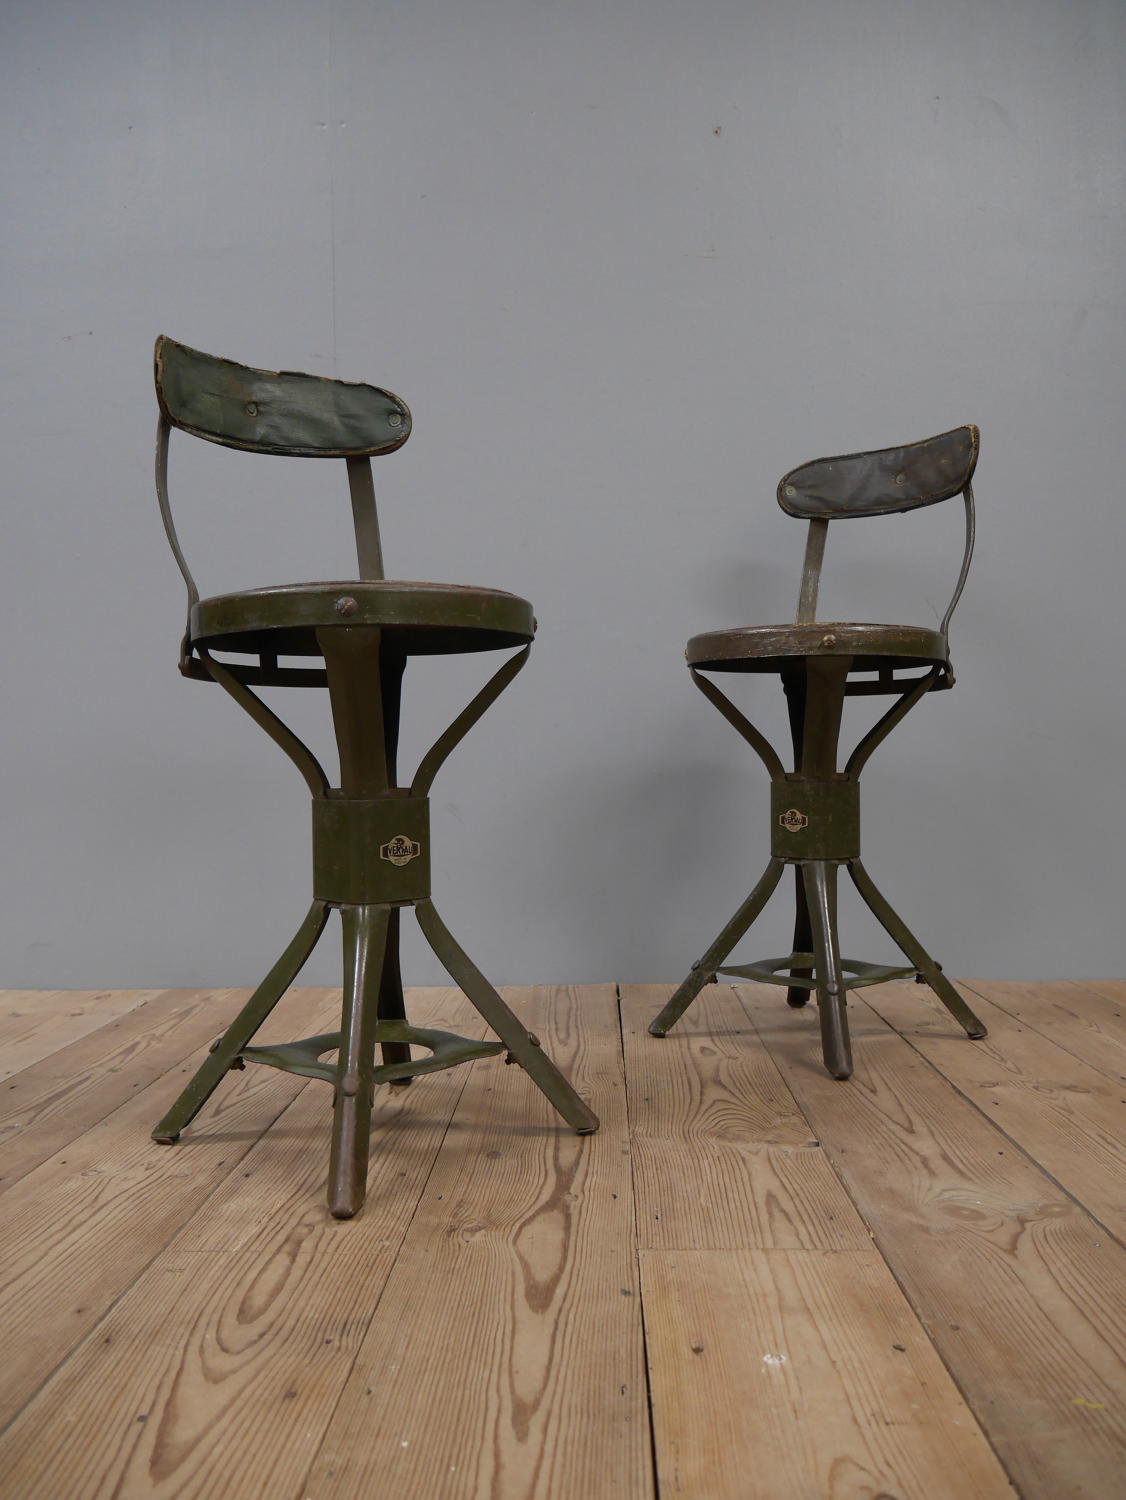 Evertaut Industrial Factory Chairs